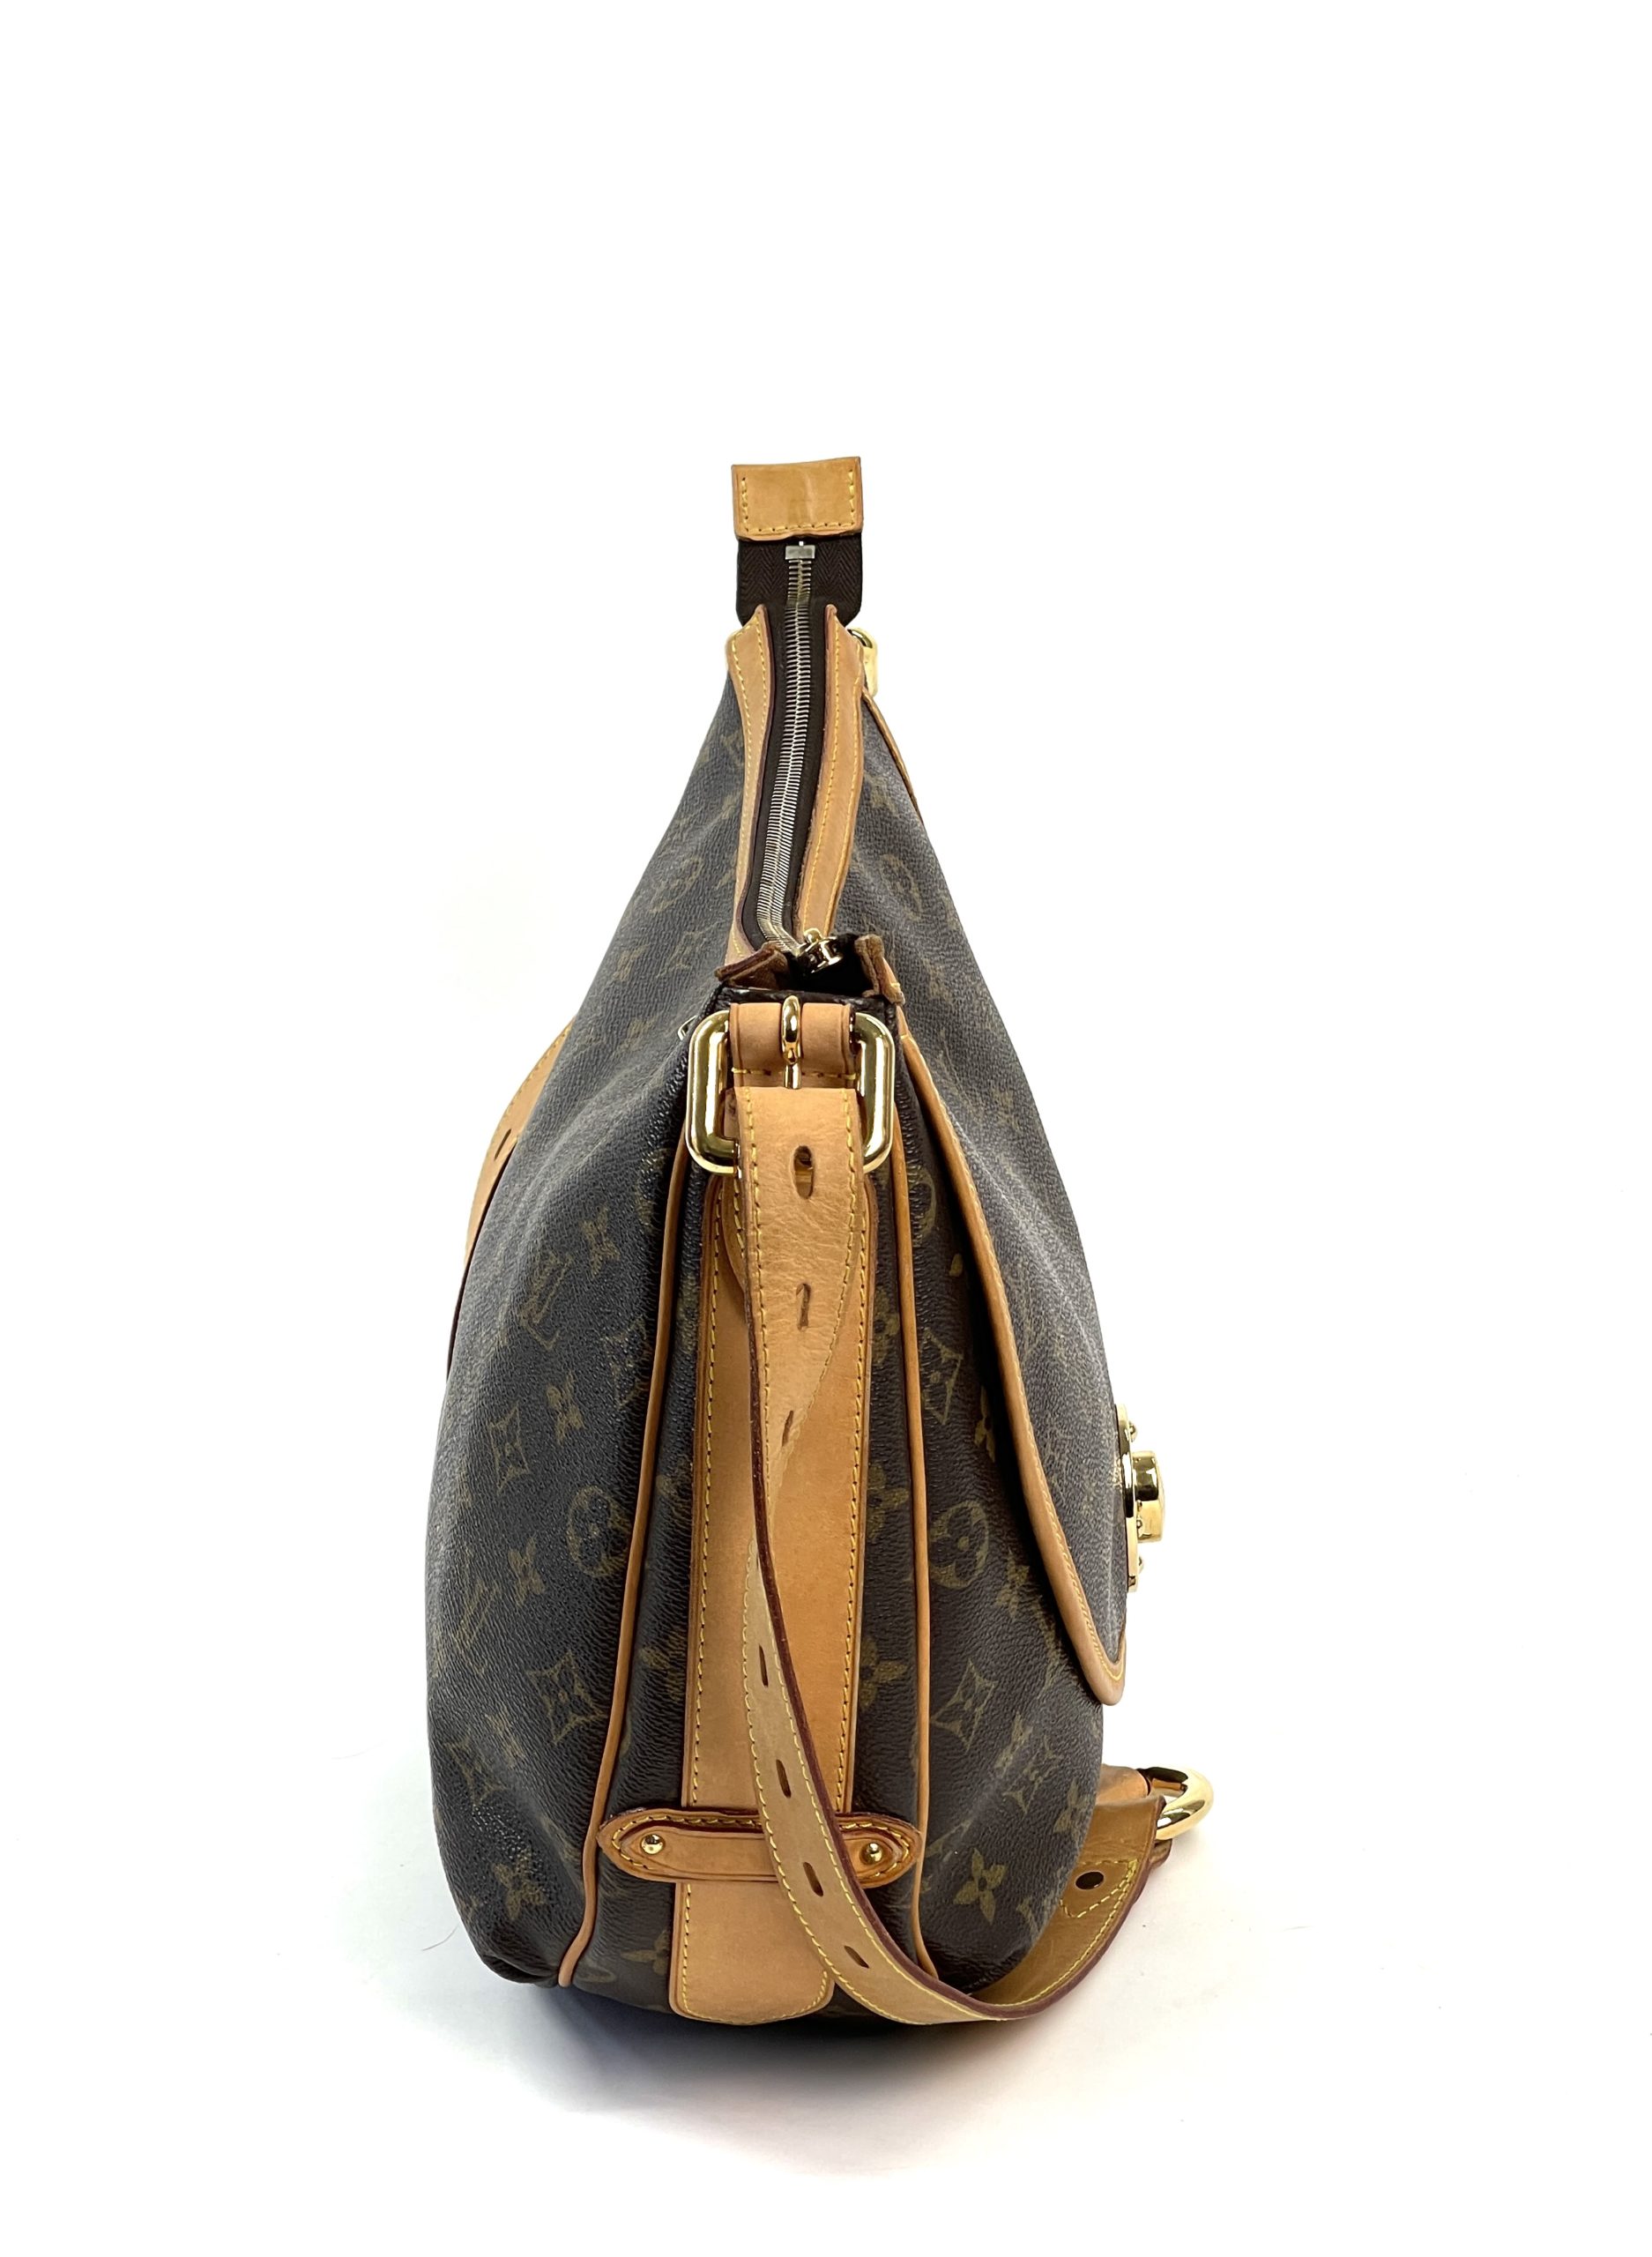 What Goes Around Comes Around Louis Vuitton Monogram Tulum Gm Bag in Brown